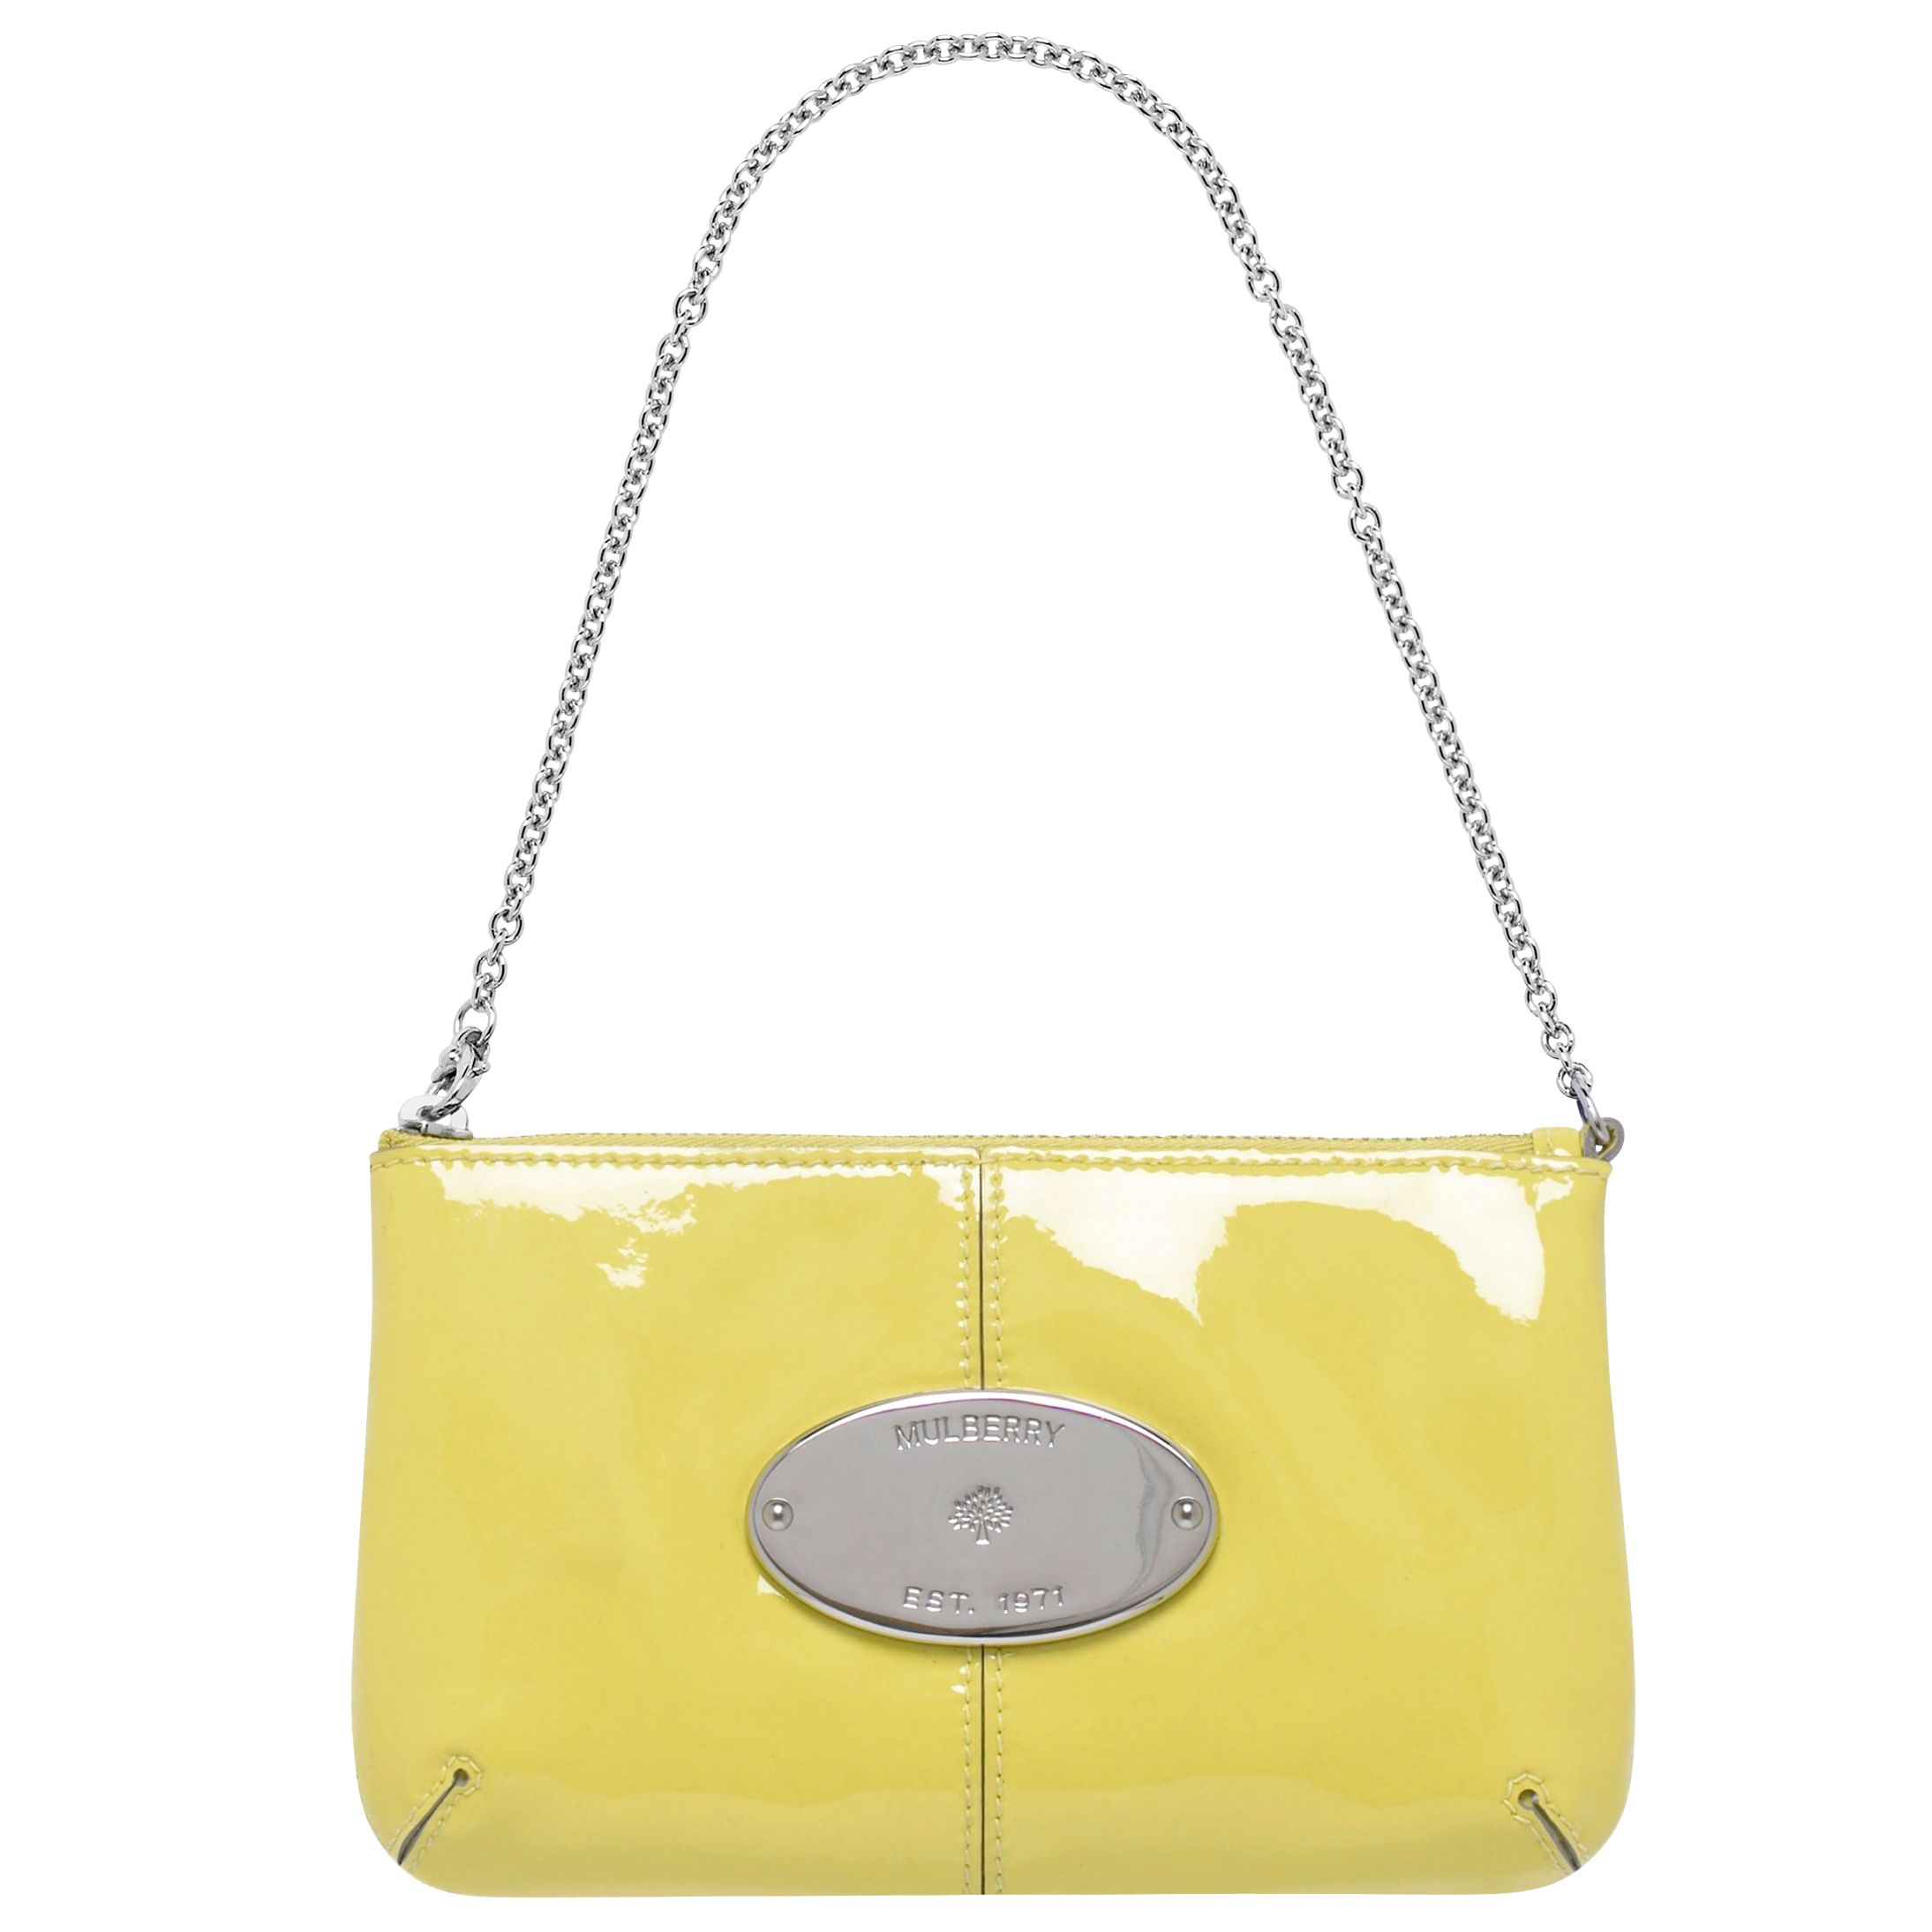 Mulberry Charlie Patent Leather Shoulder Bag, Yellow at John Lewis